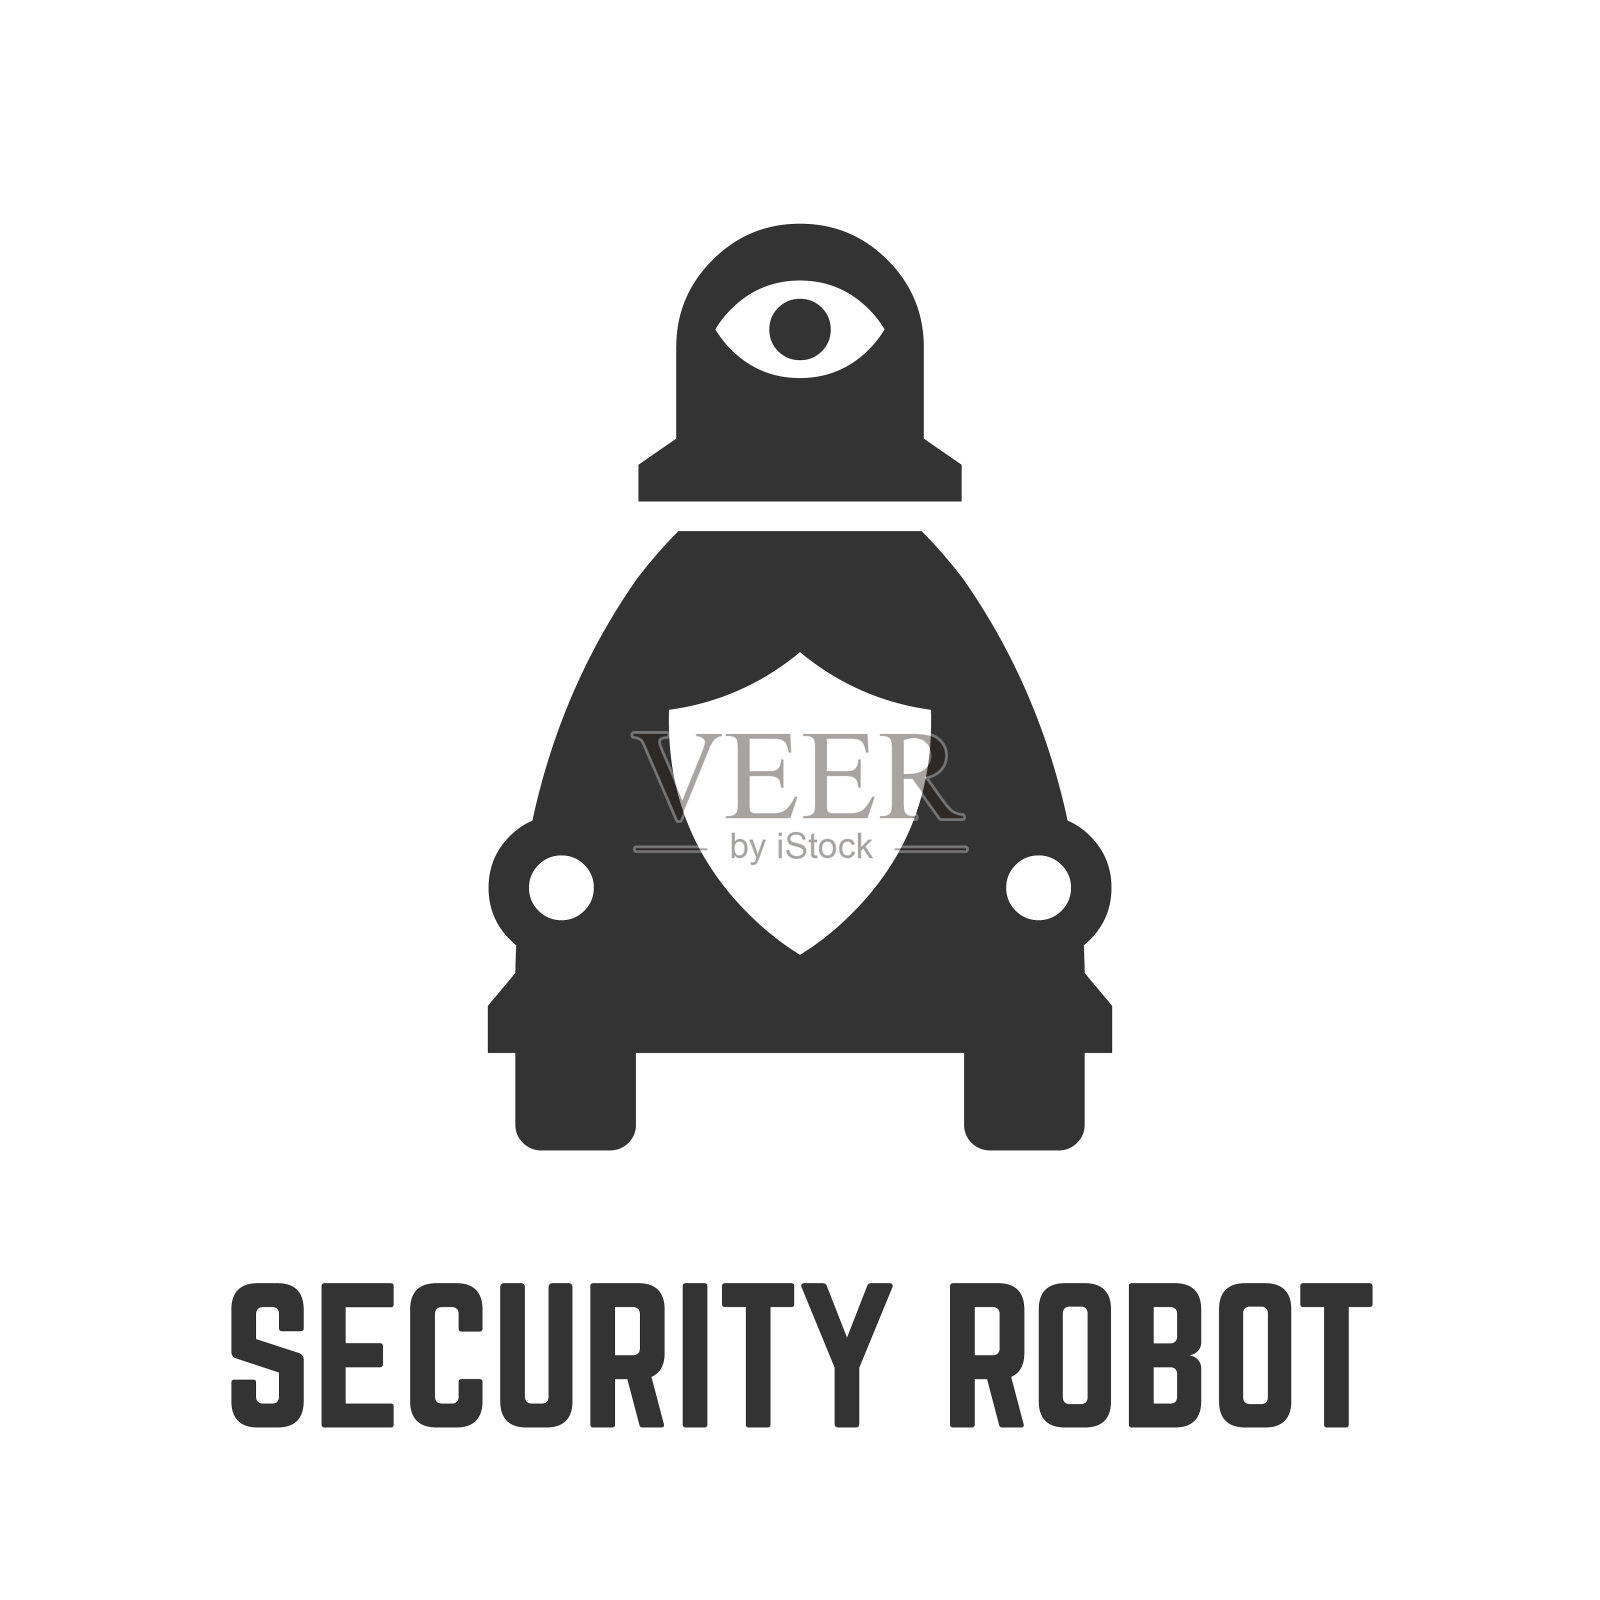 Autonomous security robot icon with self-drive machine for video surveillance, perimeter view and license plate recognition glyph symbol.插画图片素材